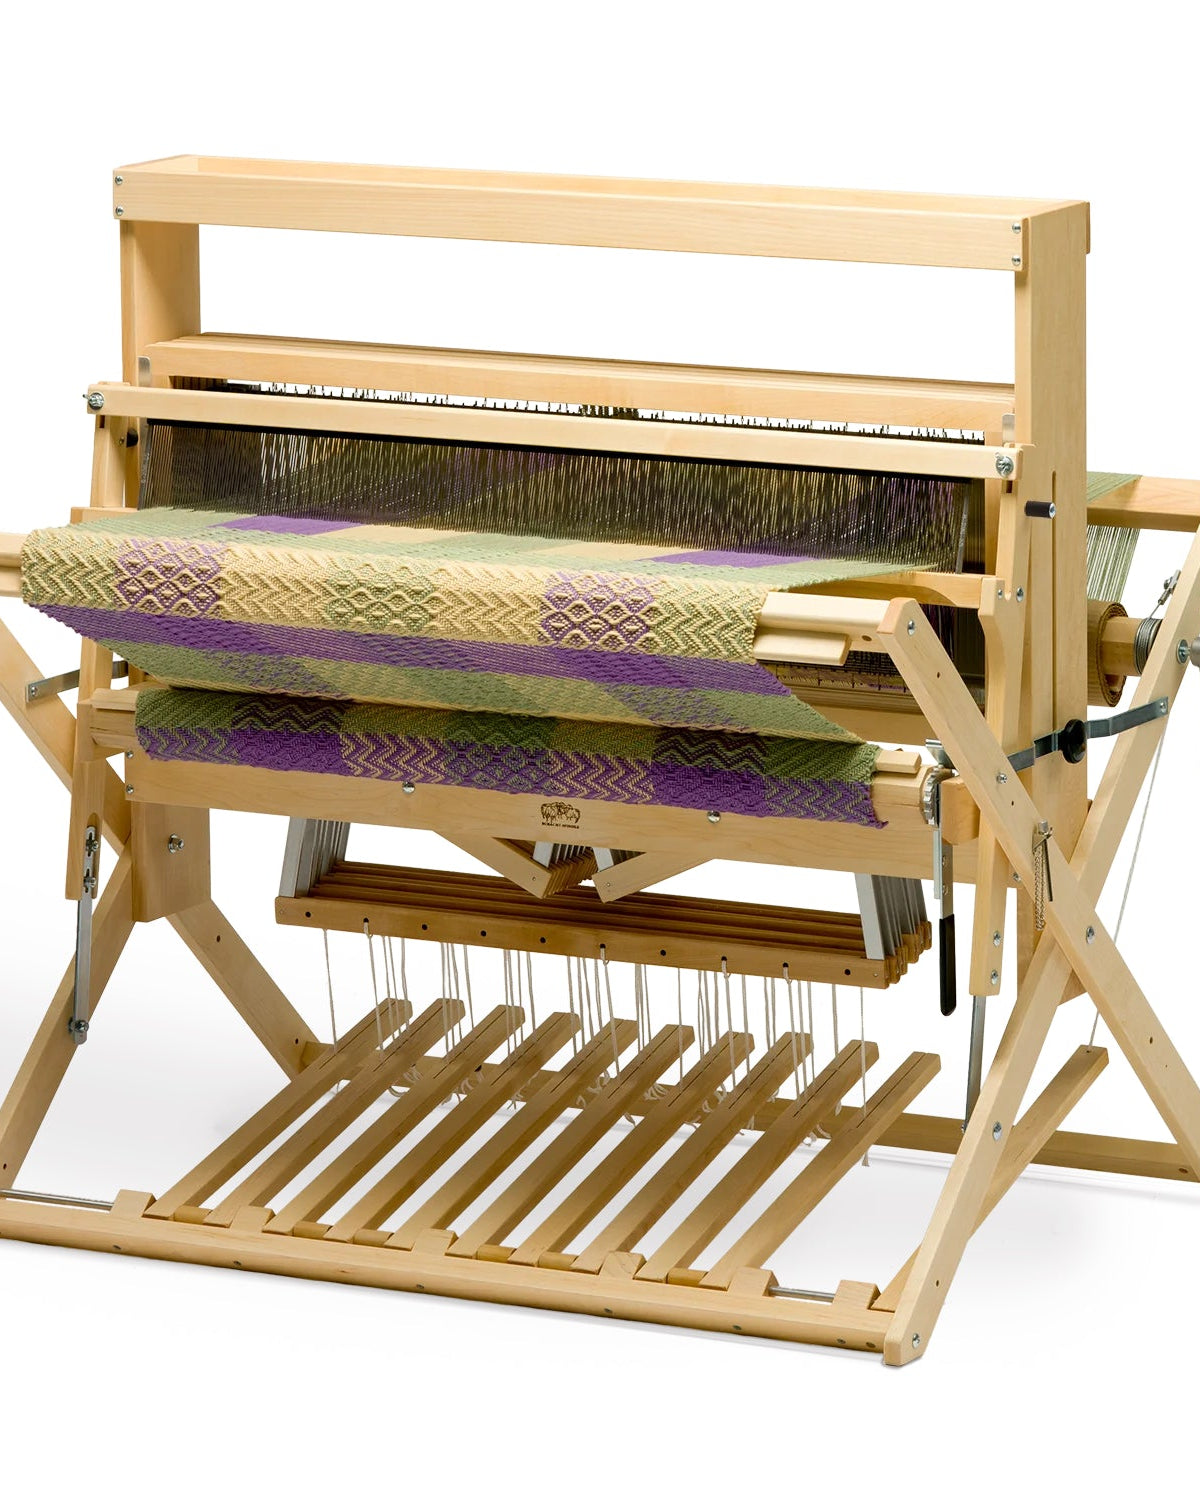 Schacht Spindle Company Weaving Schacht Mighty Wolf Loom - 8 shaft, 36"